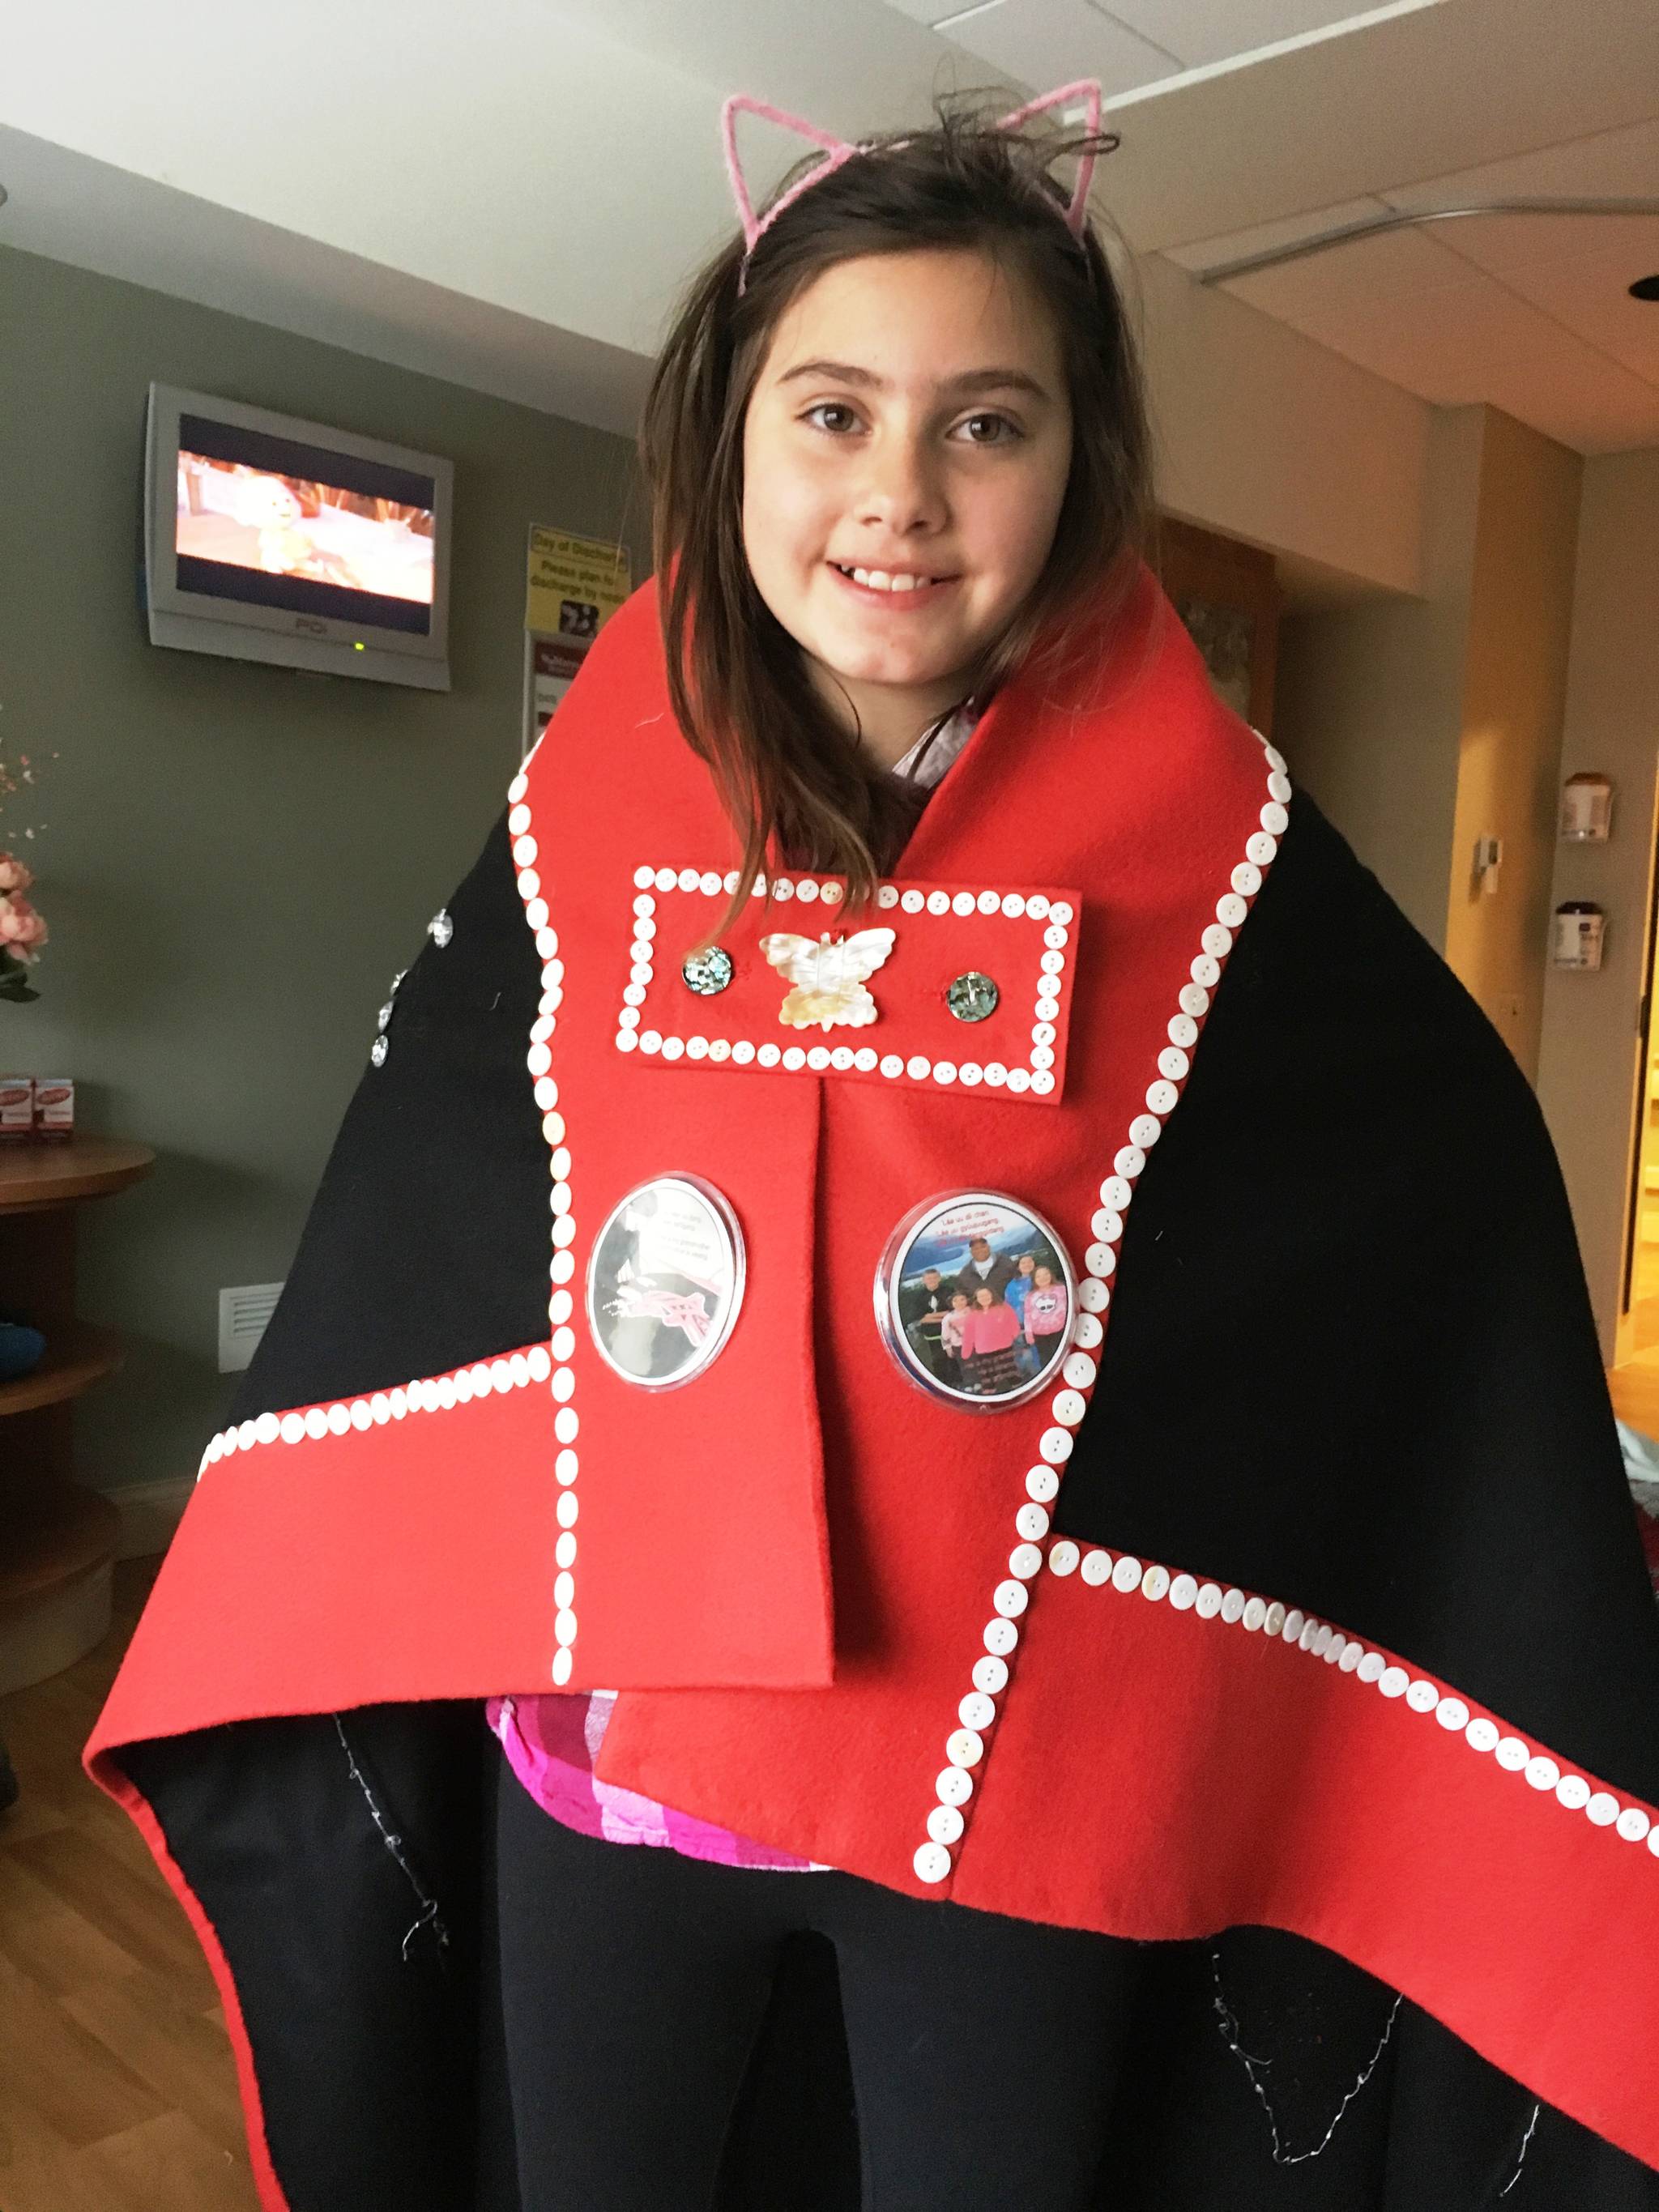 Leah Nelson shows off her button blanket. Courtesy image.